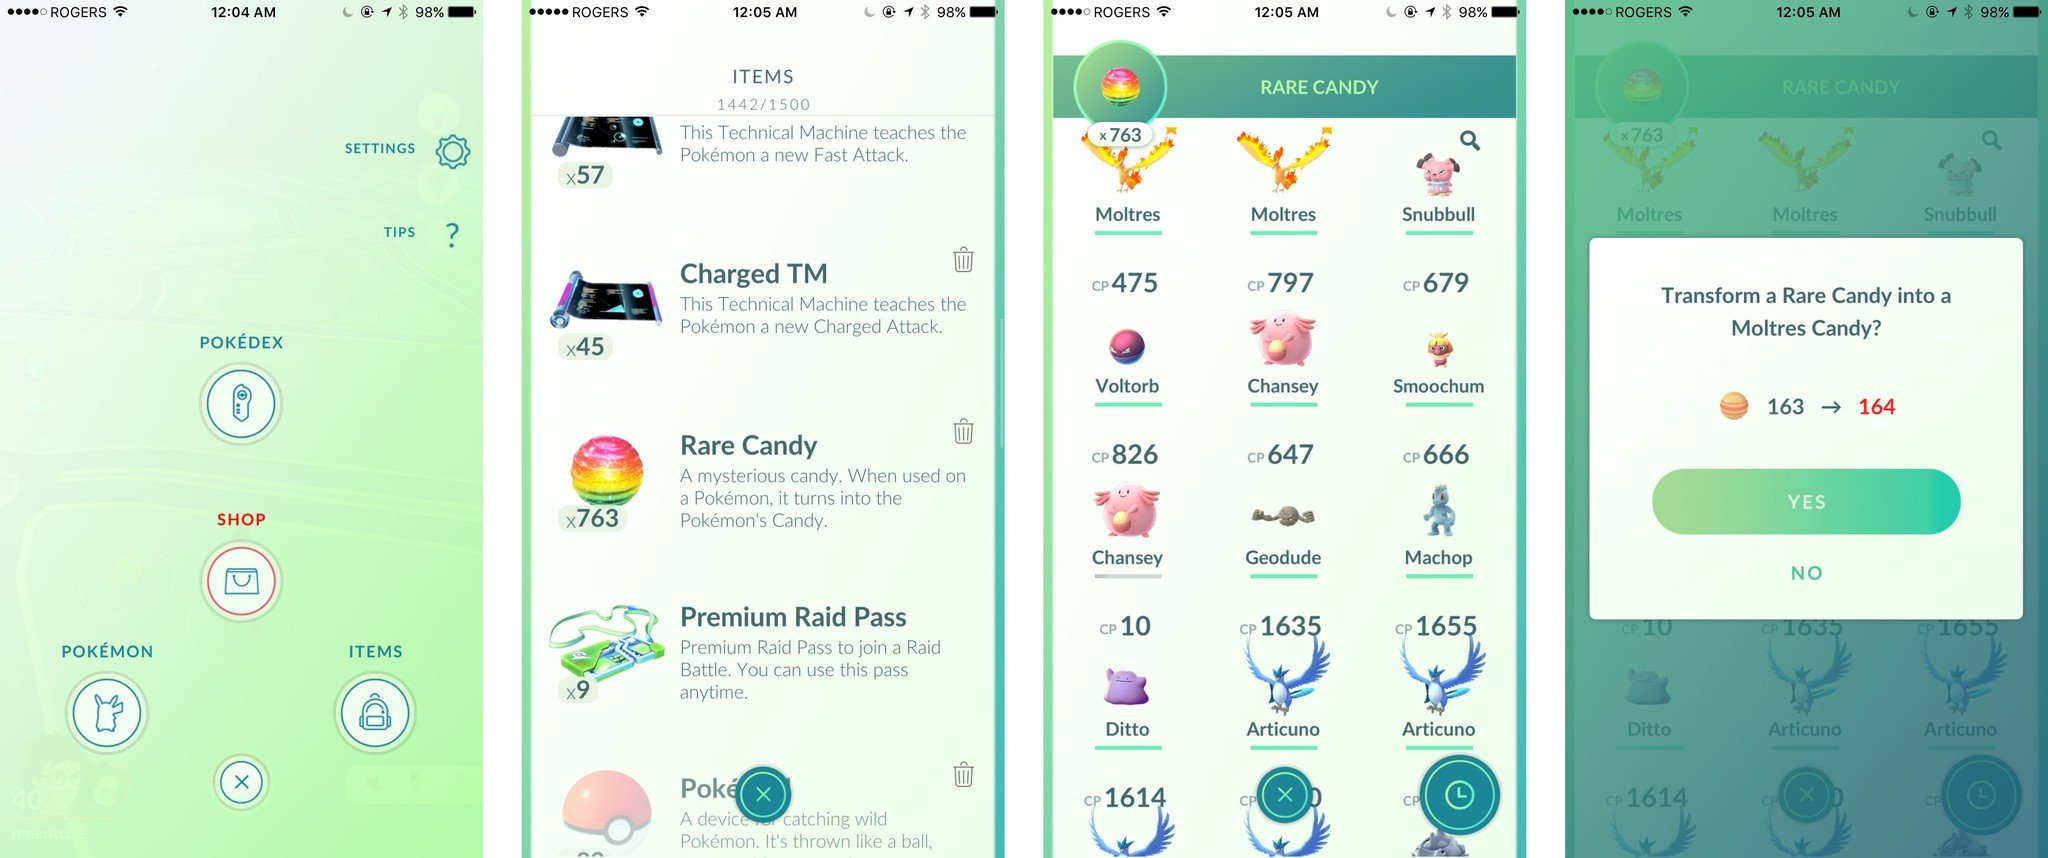 Pokémon Go: How to use Rare Candy and what to use it on | iMore